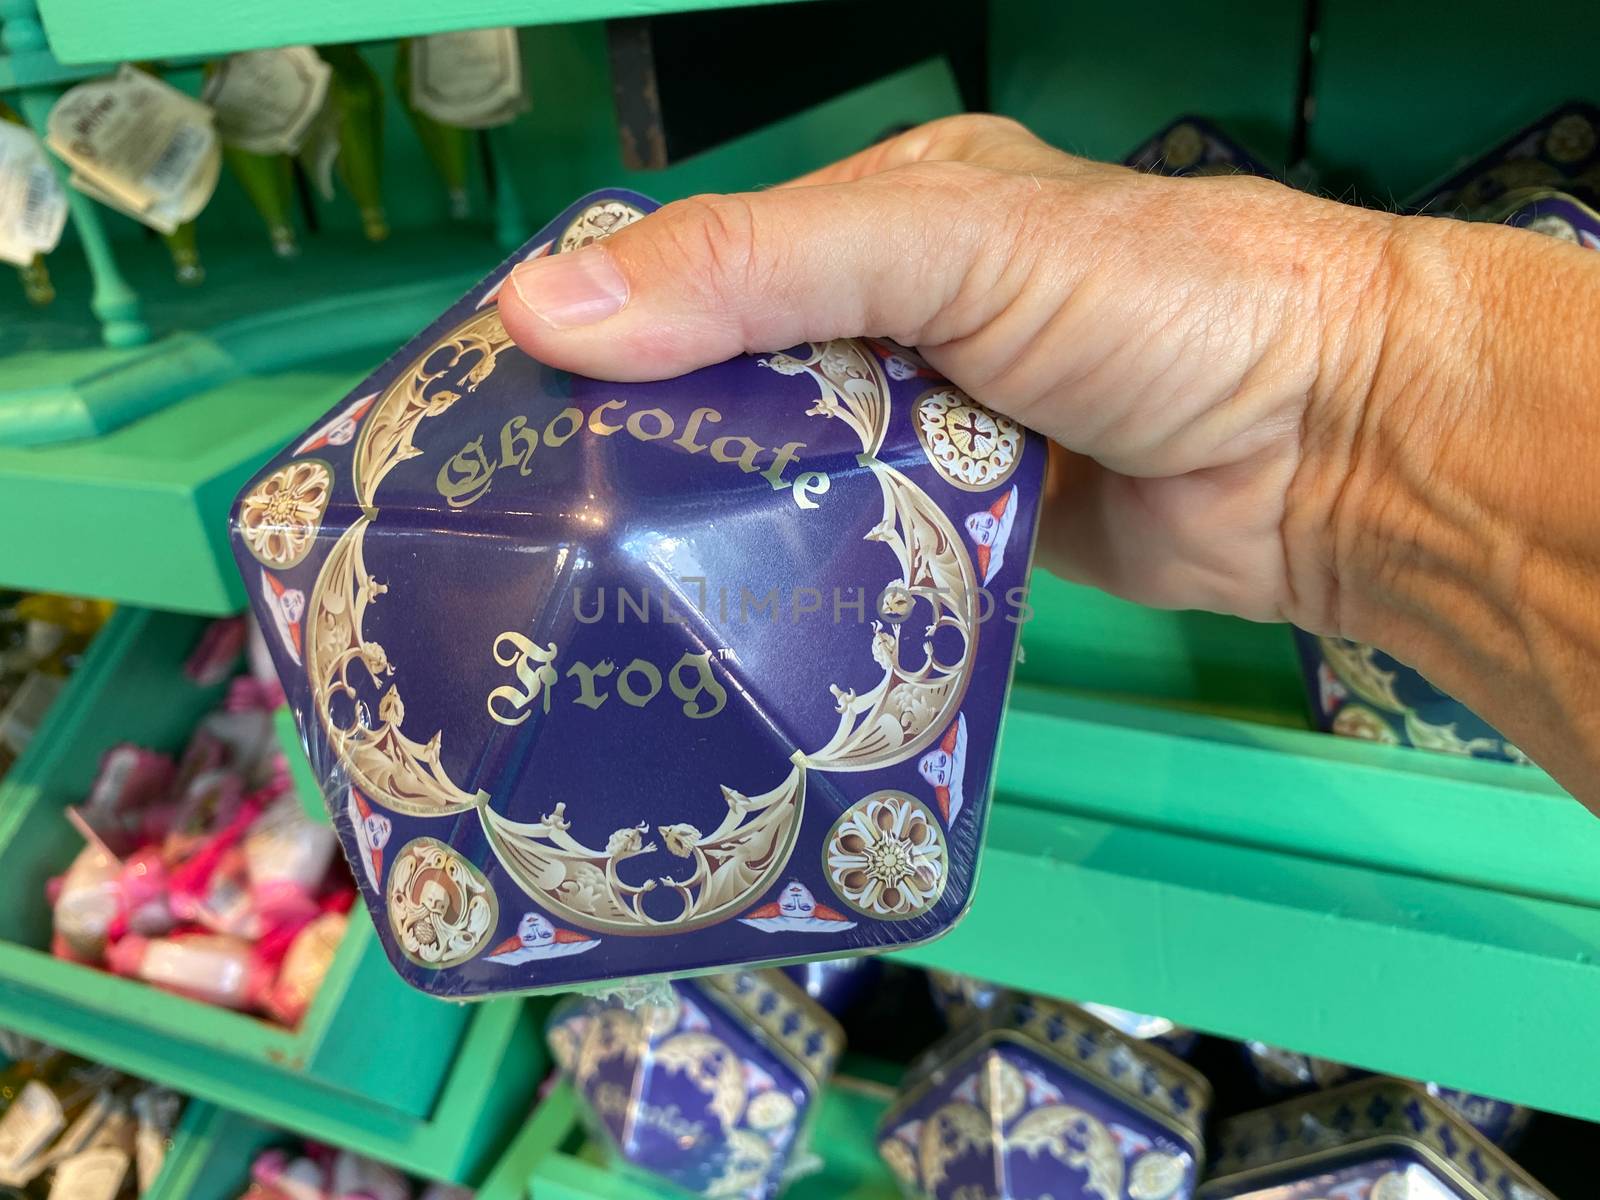 A box of Chocolate Frog at Honeydukes Sweet Shop by Jshanebutt